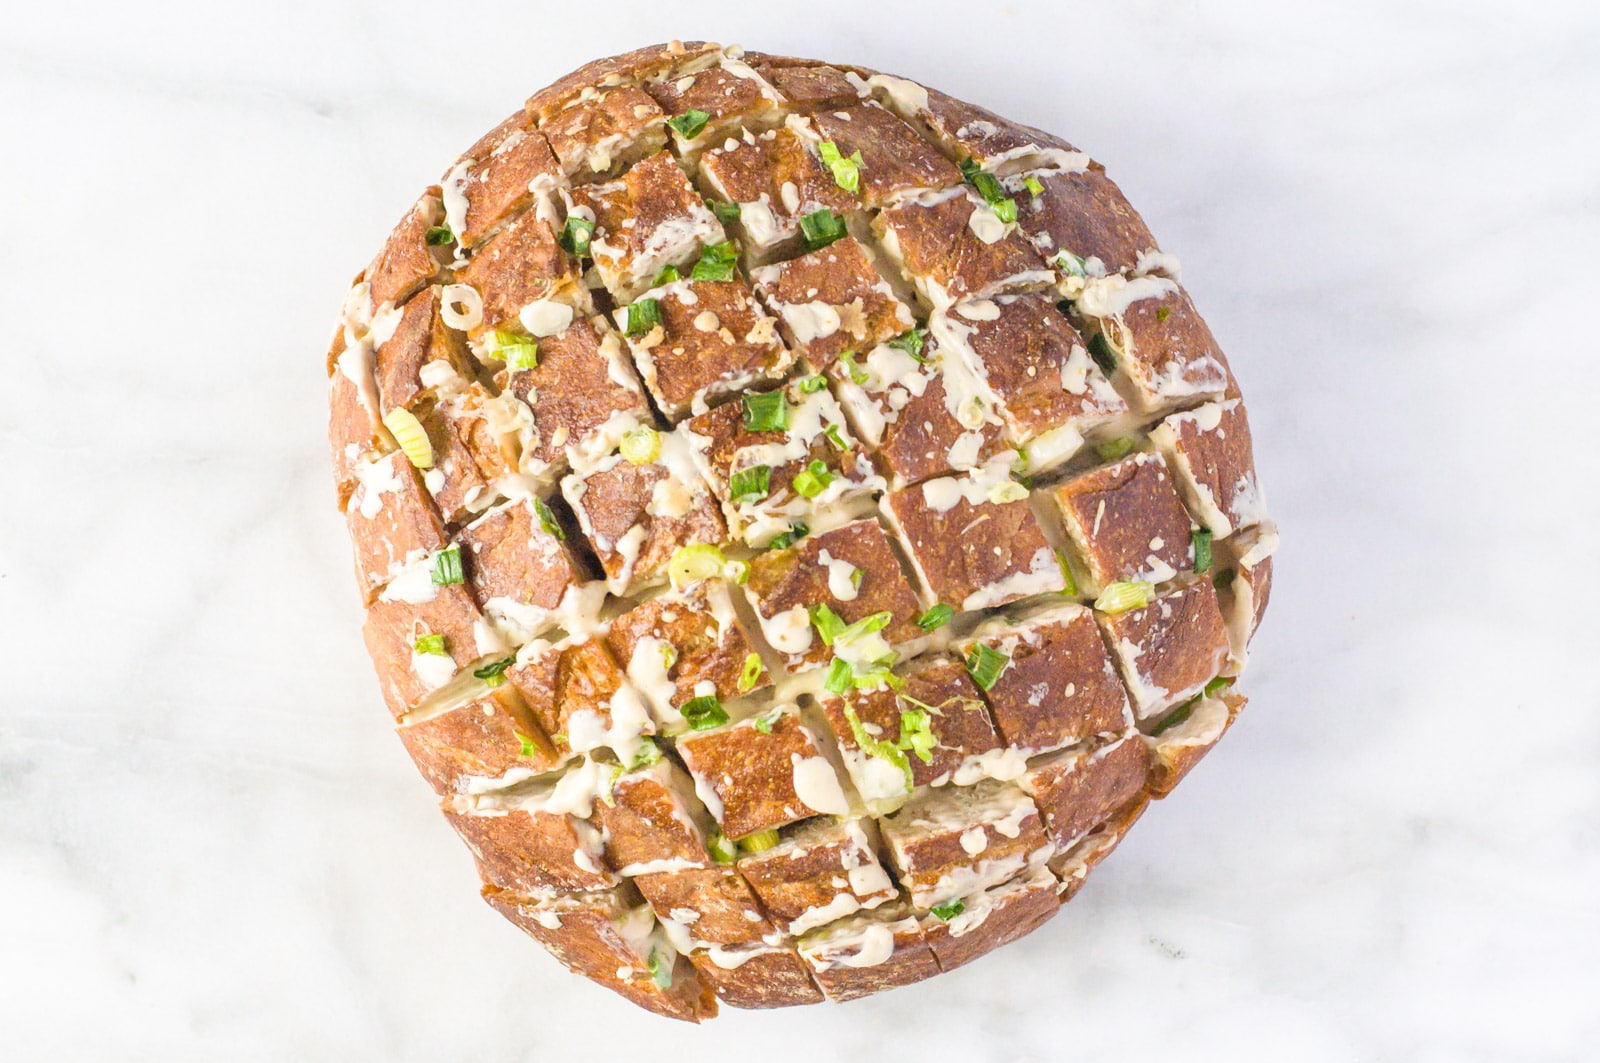 A round loaf of bread sits on a cutting board. It has been cut into cubes with cheese and green onions on top.